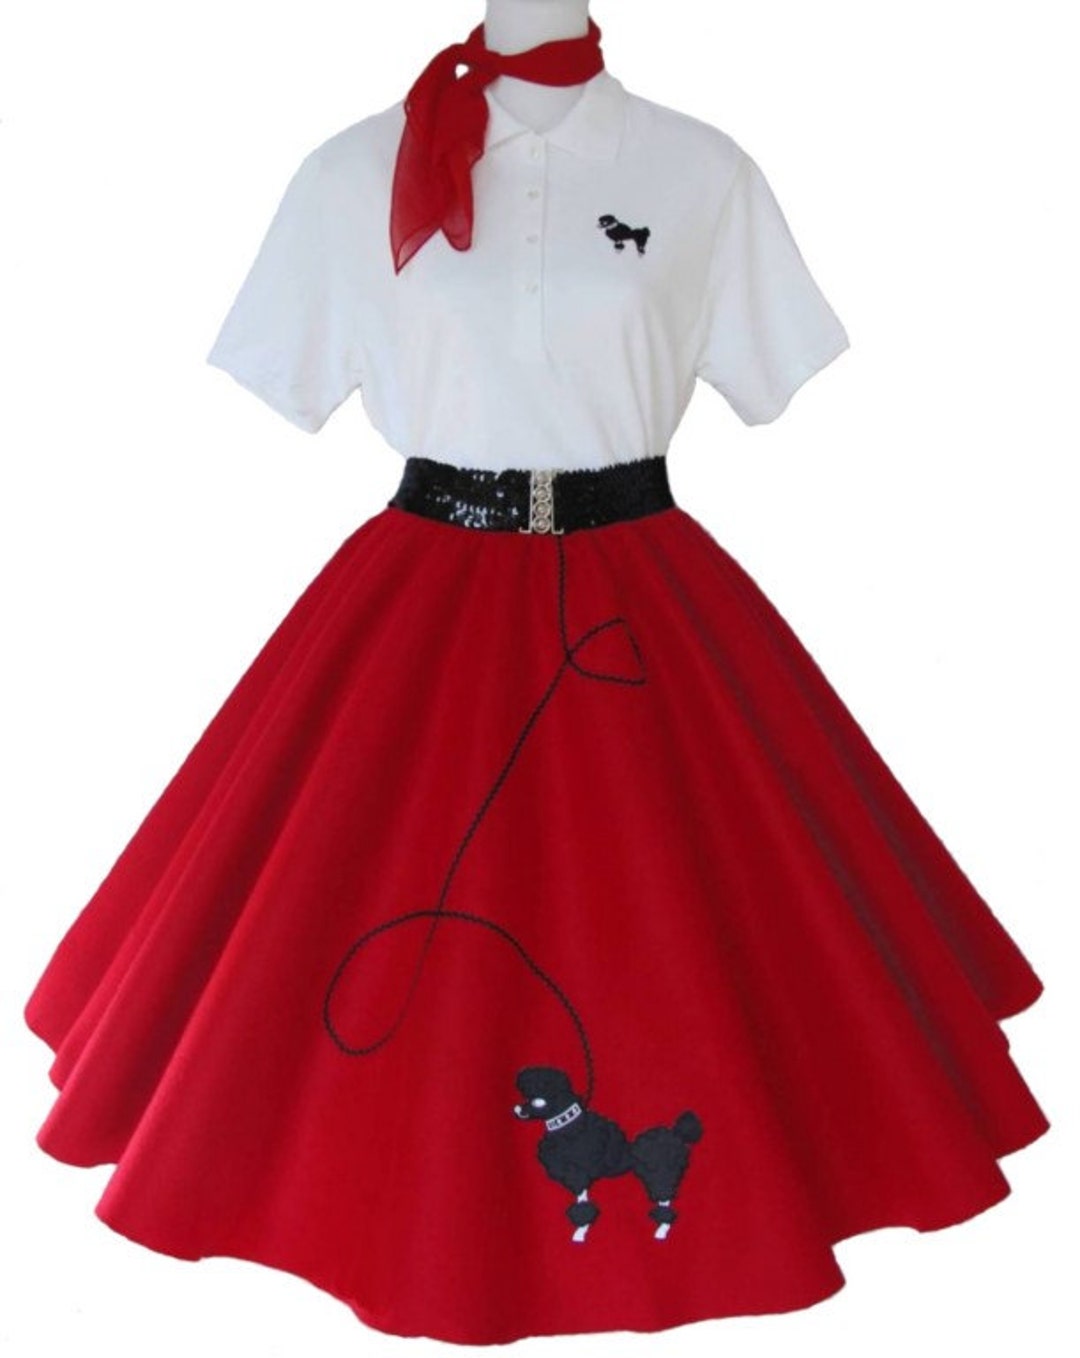 Women's 5 Pc 50's POODLE SKIRT OUTFIT for Adult S M L Xl 2x